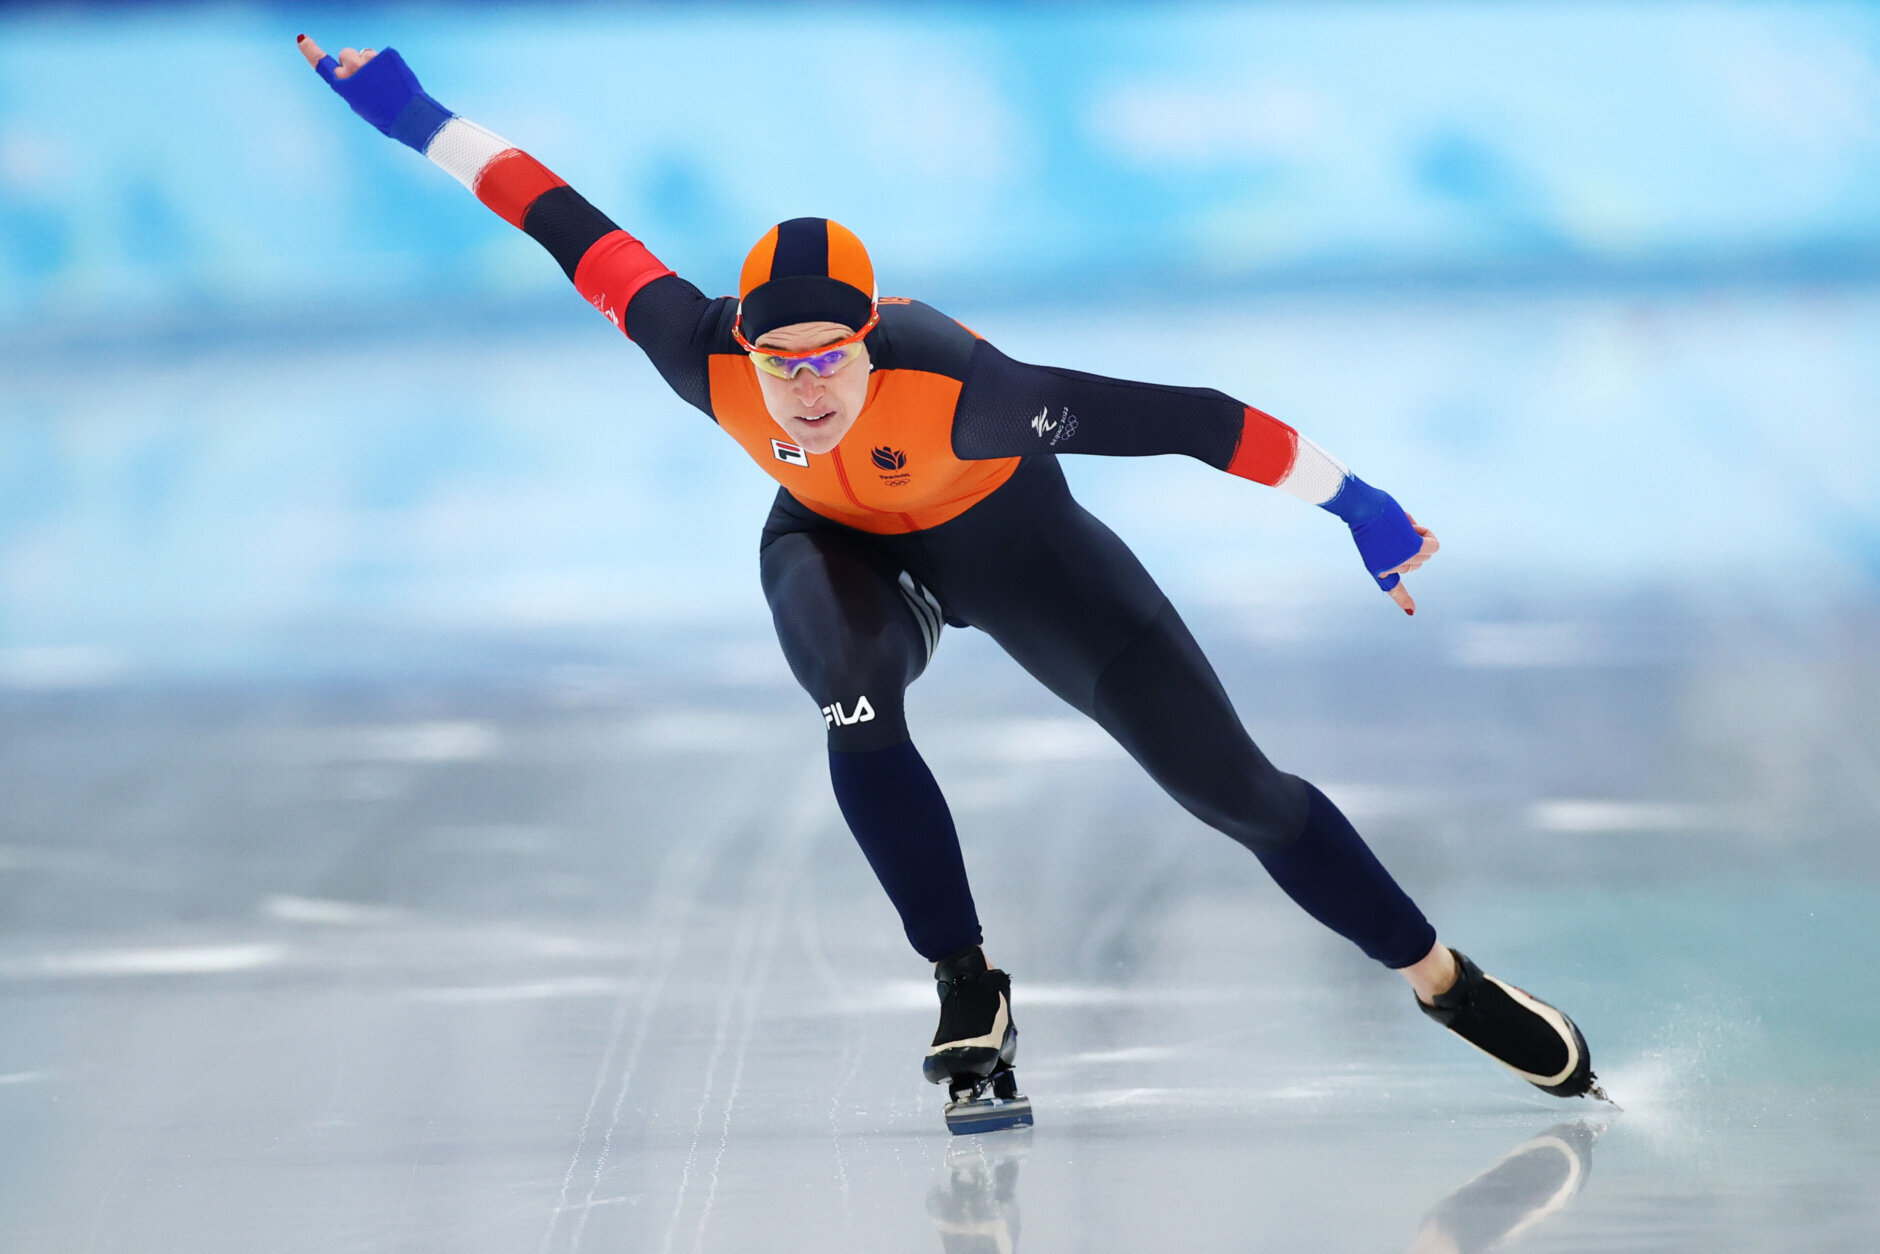 BEIJING, CHINA - FEBRUARY 17: Ireen Wust of Team Netherlands skates during the Women's 1000m flower ceremony on day thirteen of the Beijing 2022 Winter Olympic Games at National Speed Skating Oval on February 17, 2022 in Beijing, China. (Photo by Dean Mouhtaropoulos/Getty Images)